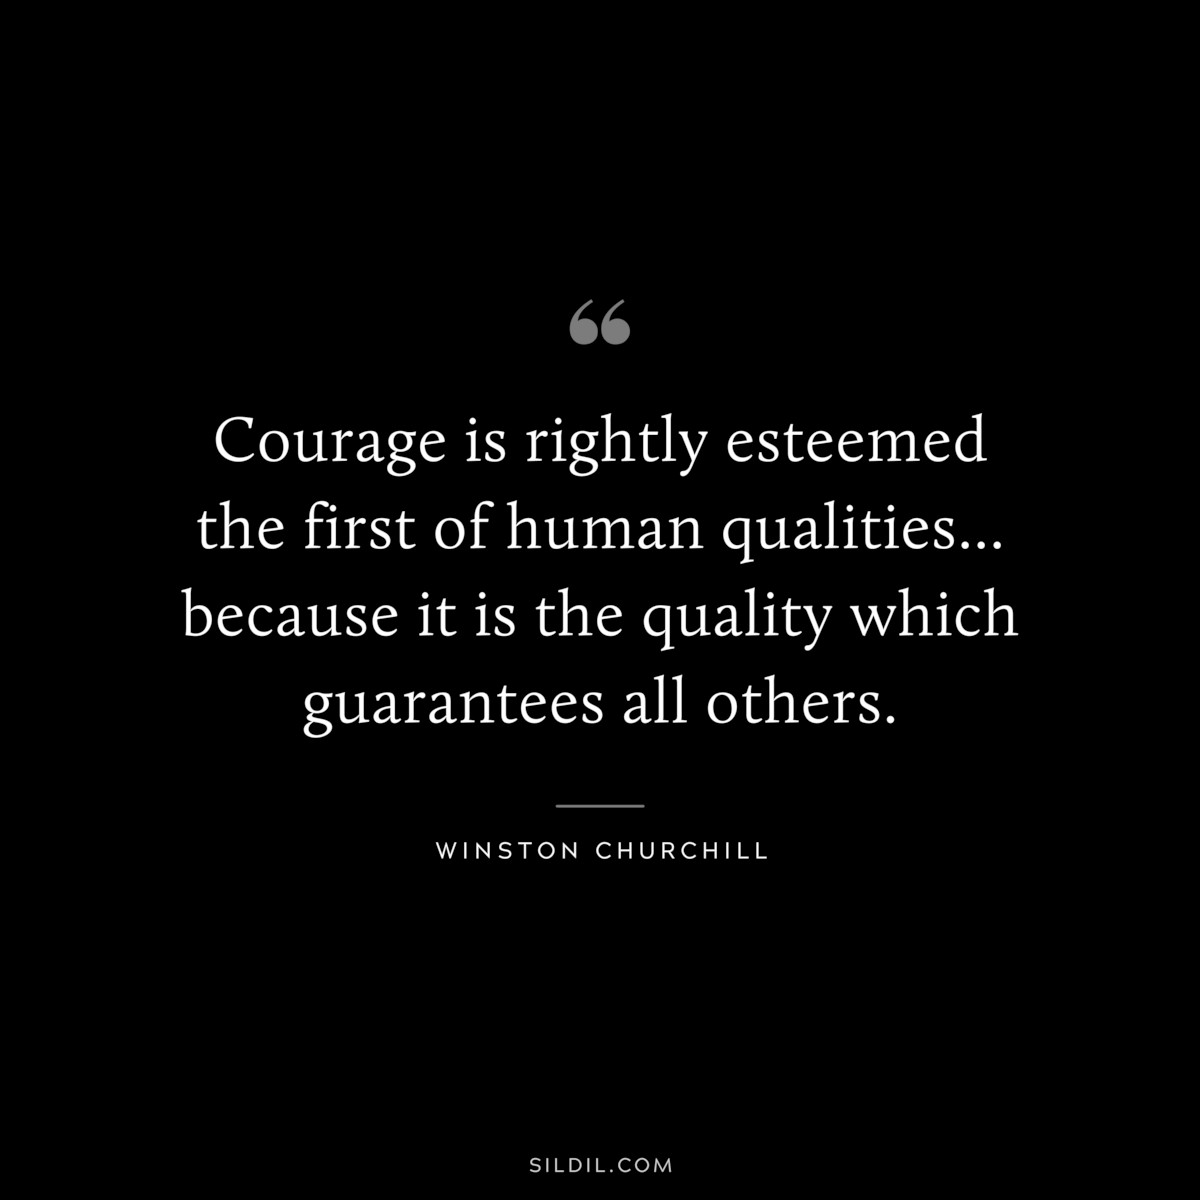 Courage is rightly esteemed the first of human qualities... because it is the quality which guarantees all others. ― Winston Churchill